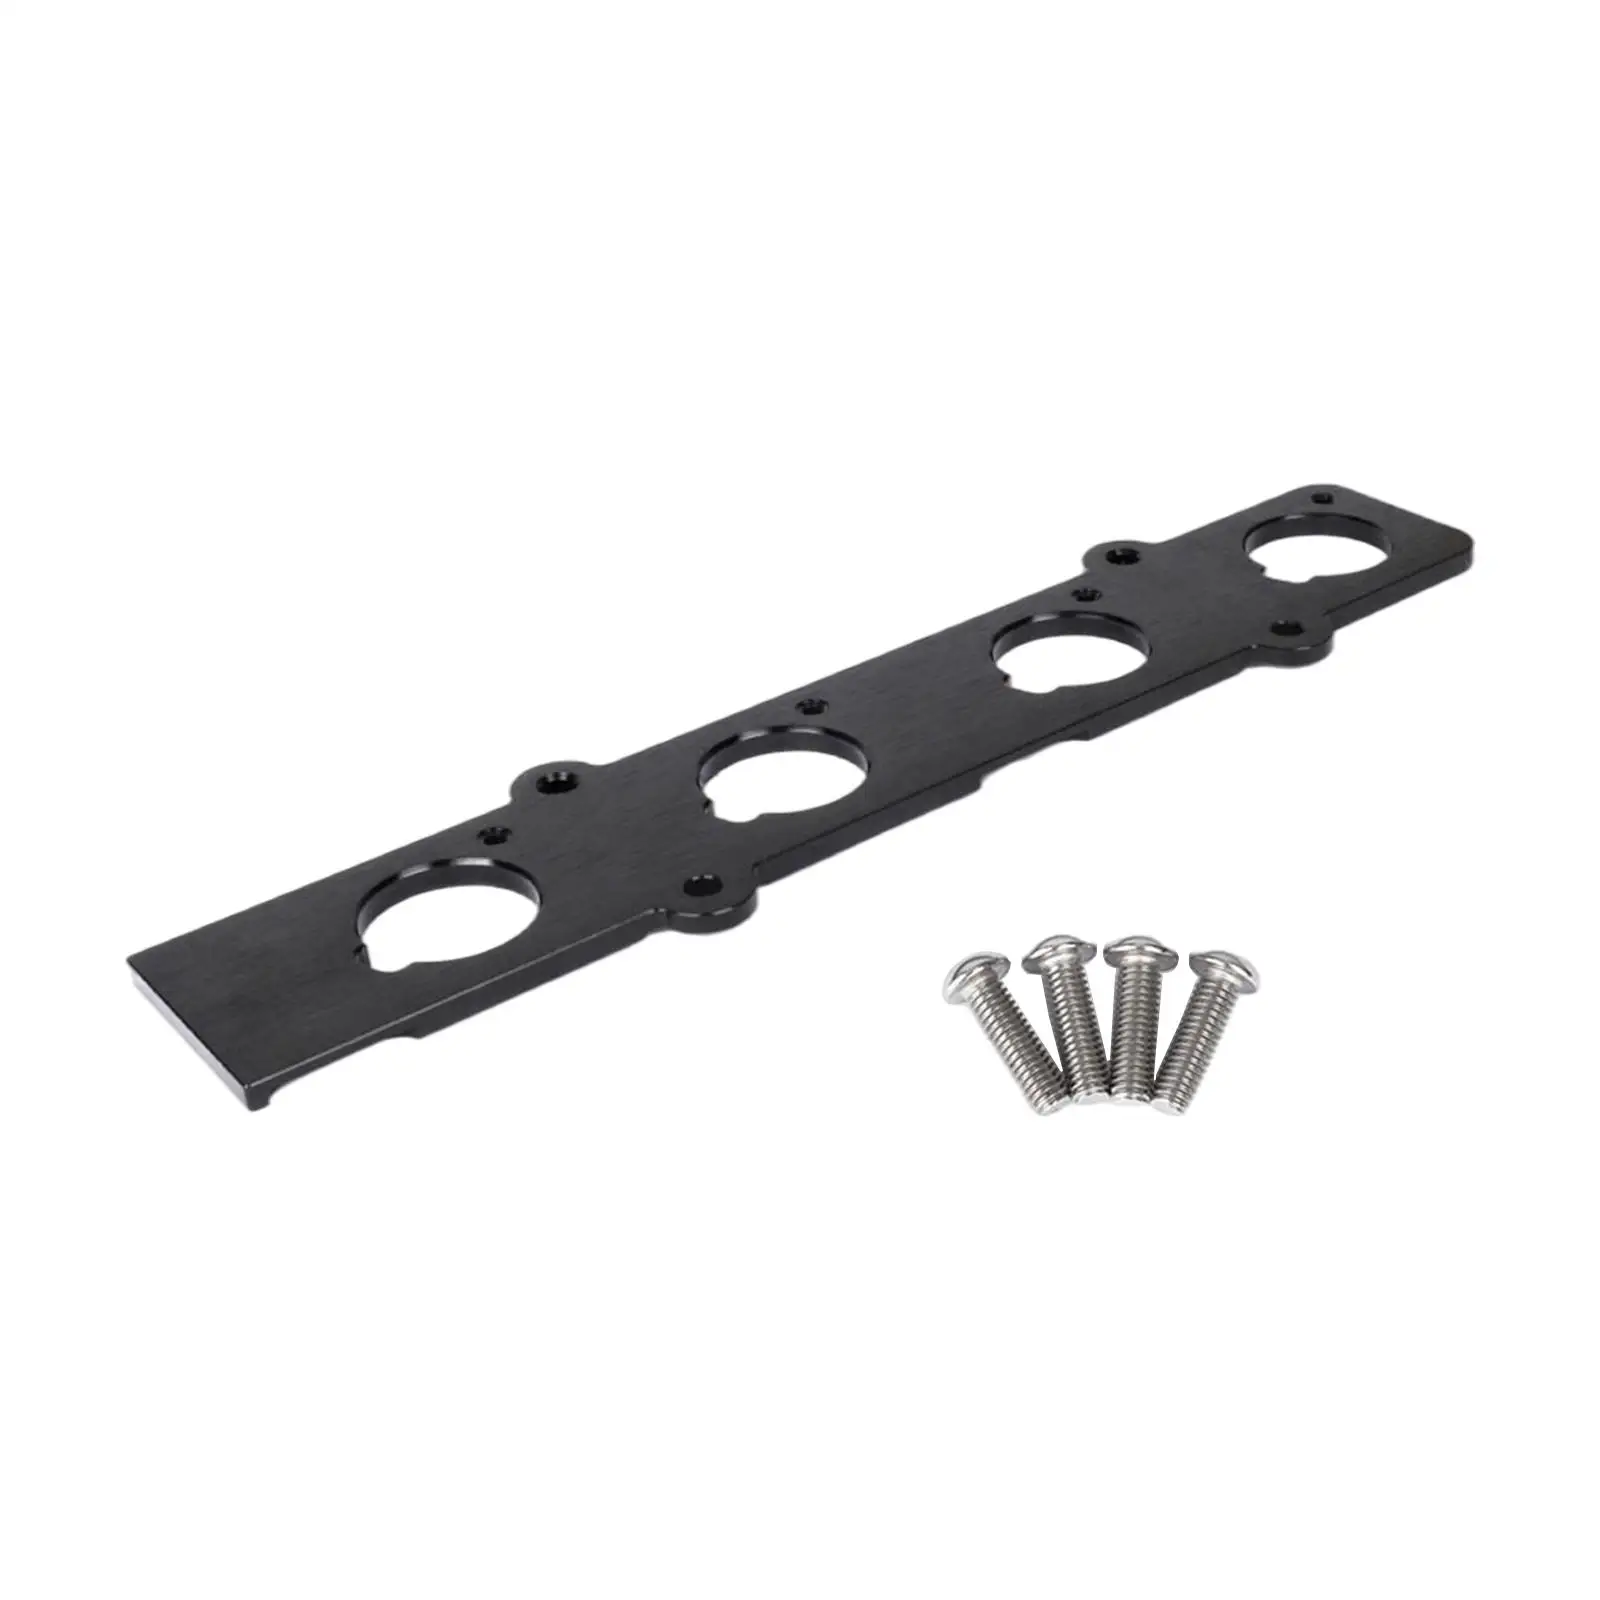 B-Series Dohc Vtec Coil Coil Adapter Automotive Replacement Parts Adapter Plate Conversion Adapters for Acura B16 B18